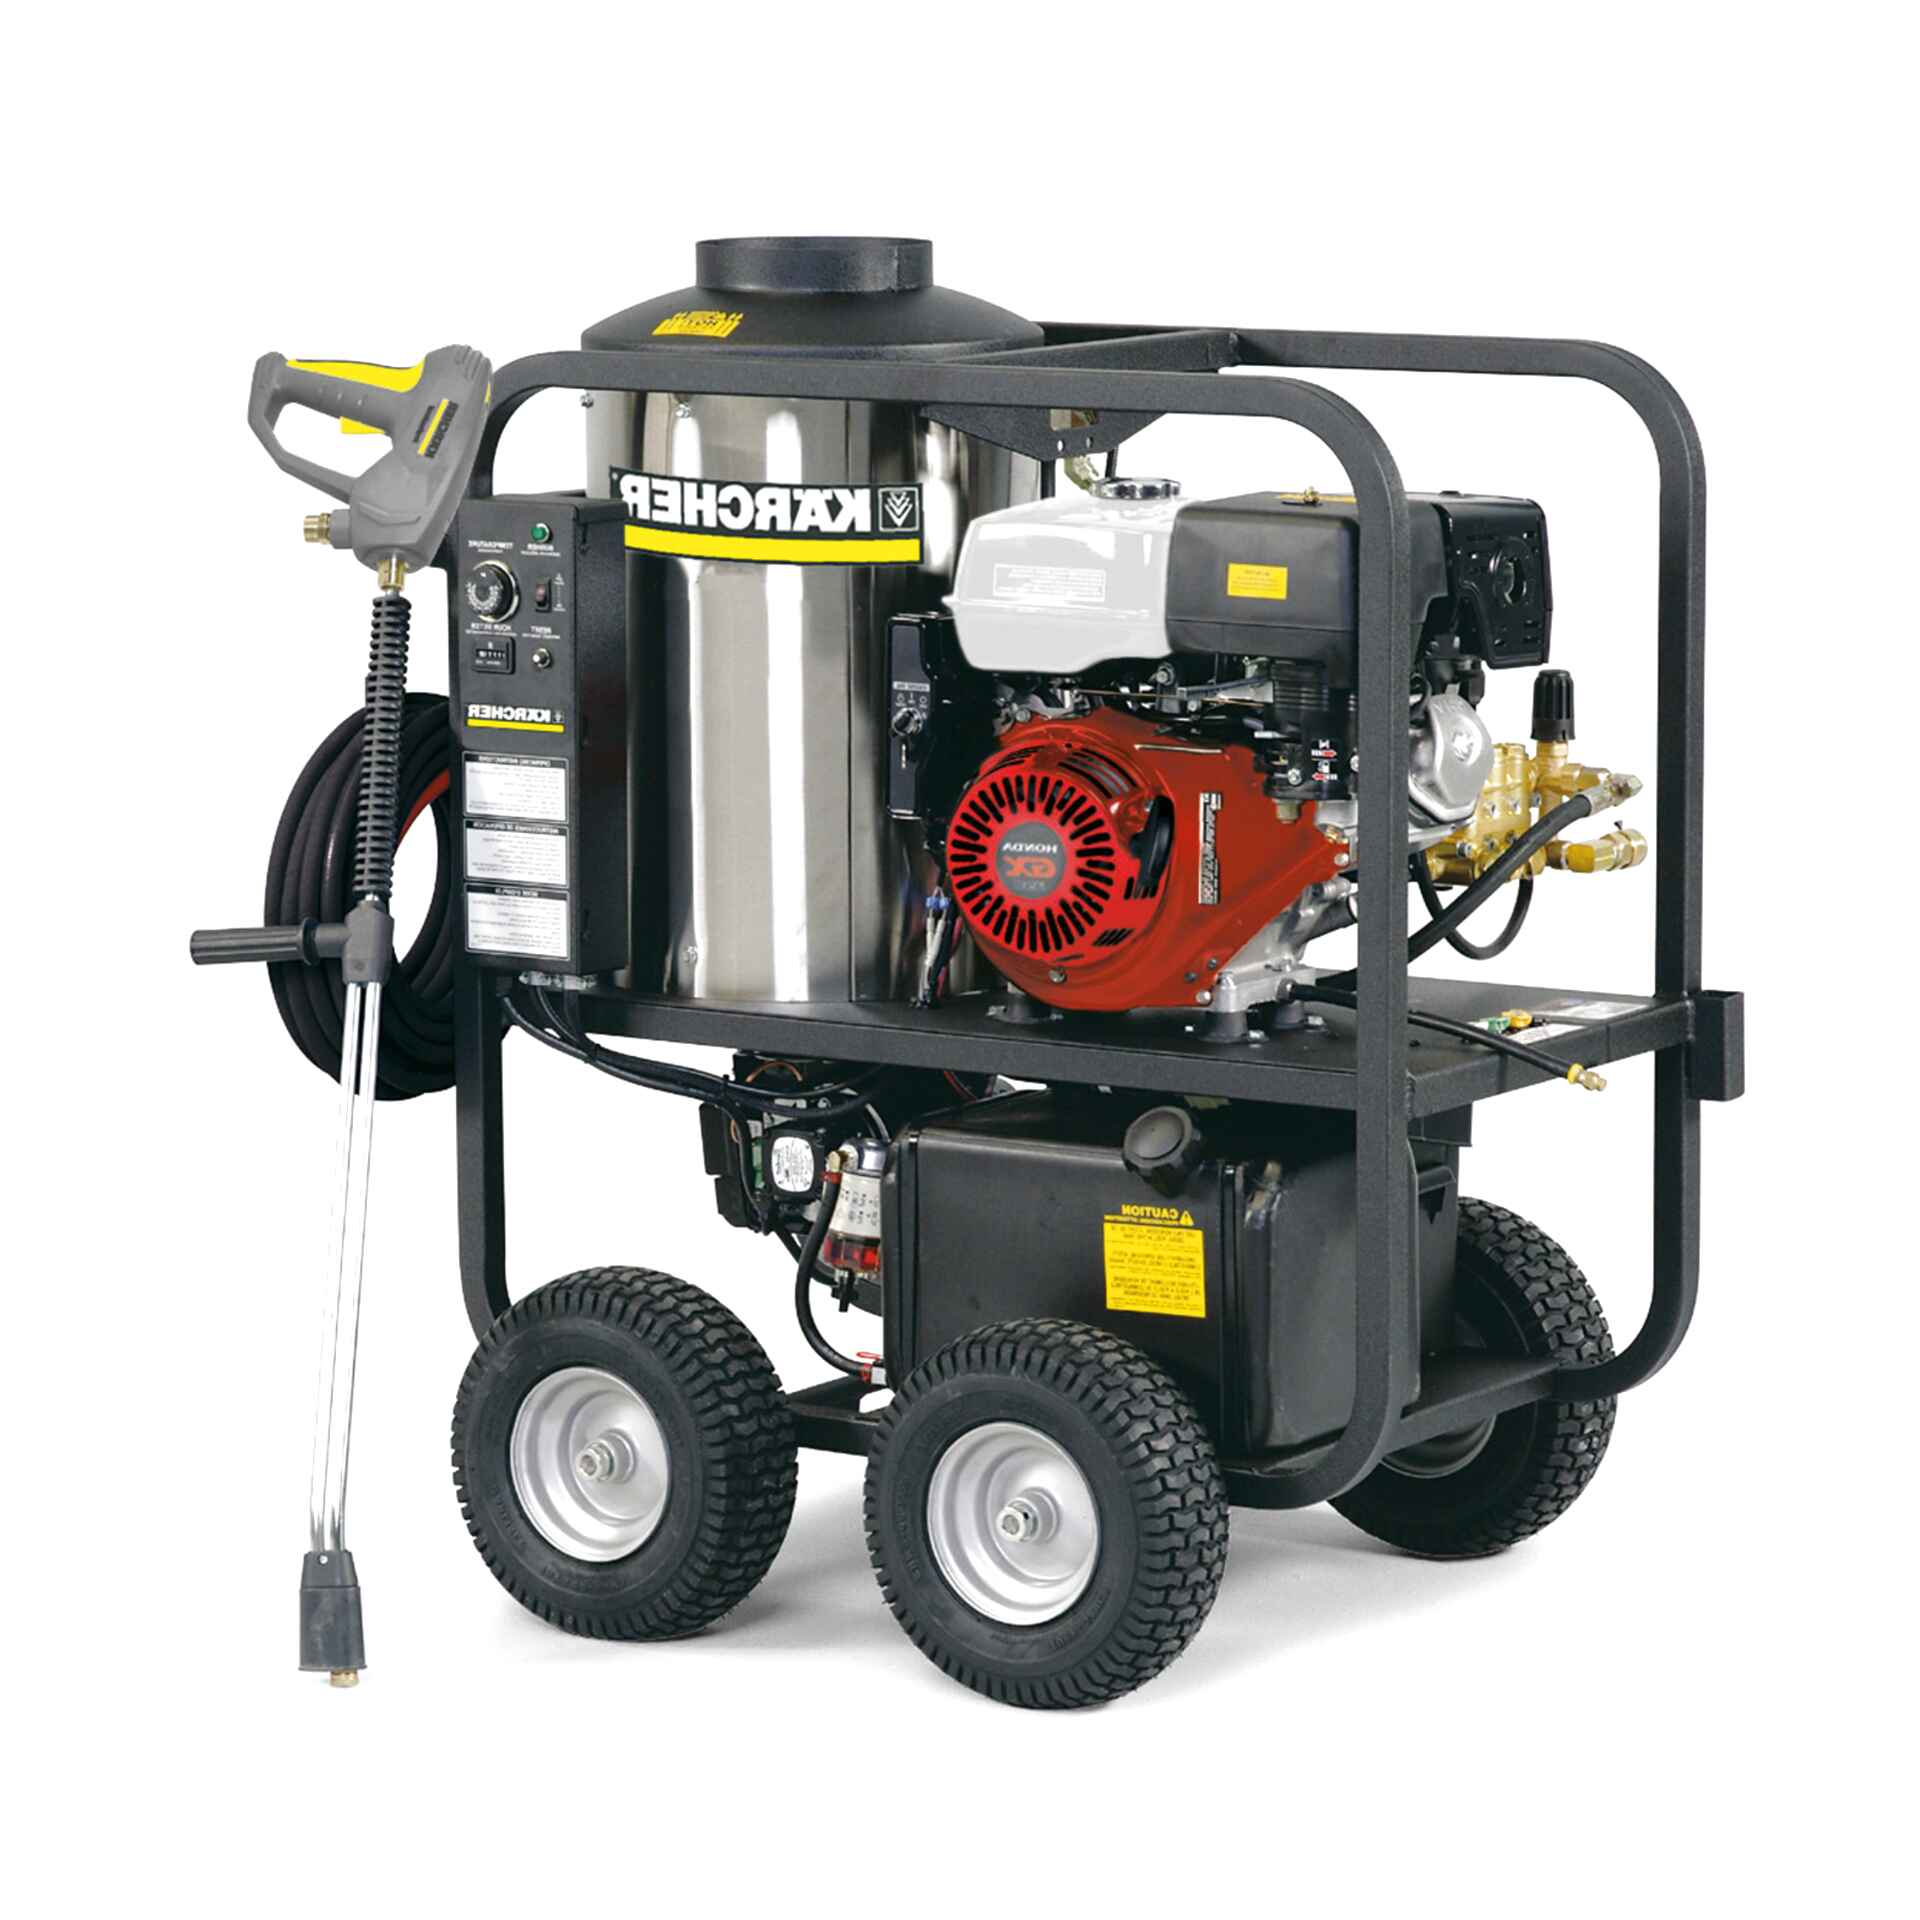 Honda Gx Pressure Washer for sale in UK View 55 ads